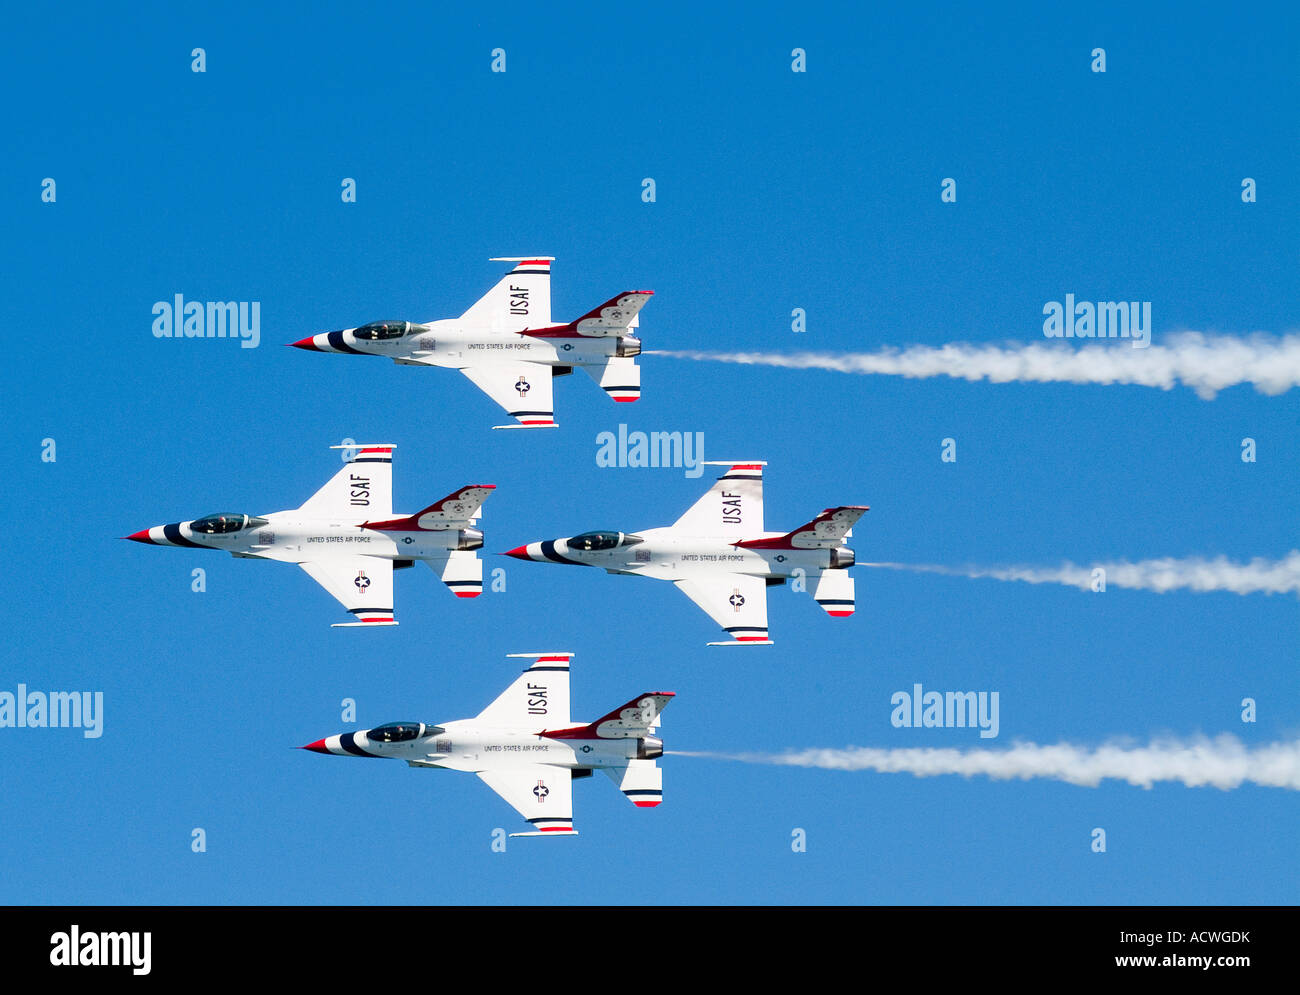 FIGHTER JETS FLYING IN FORMATION Stock Photo